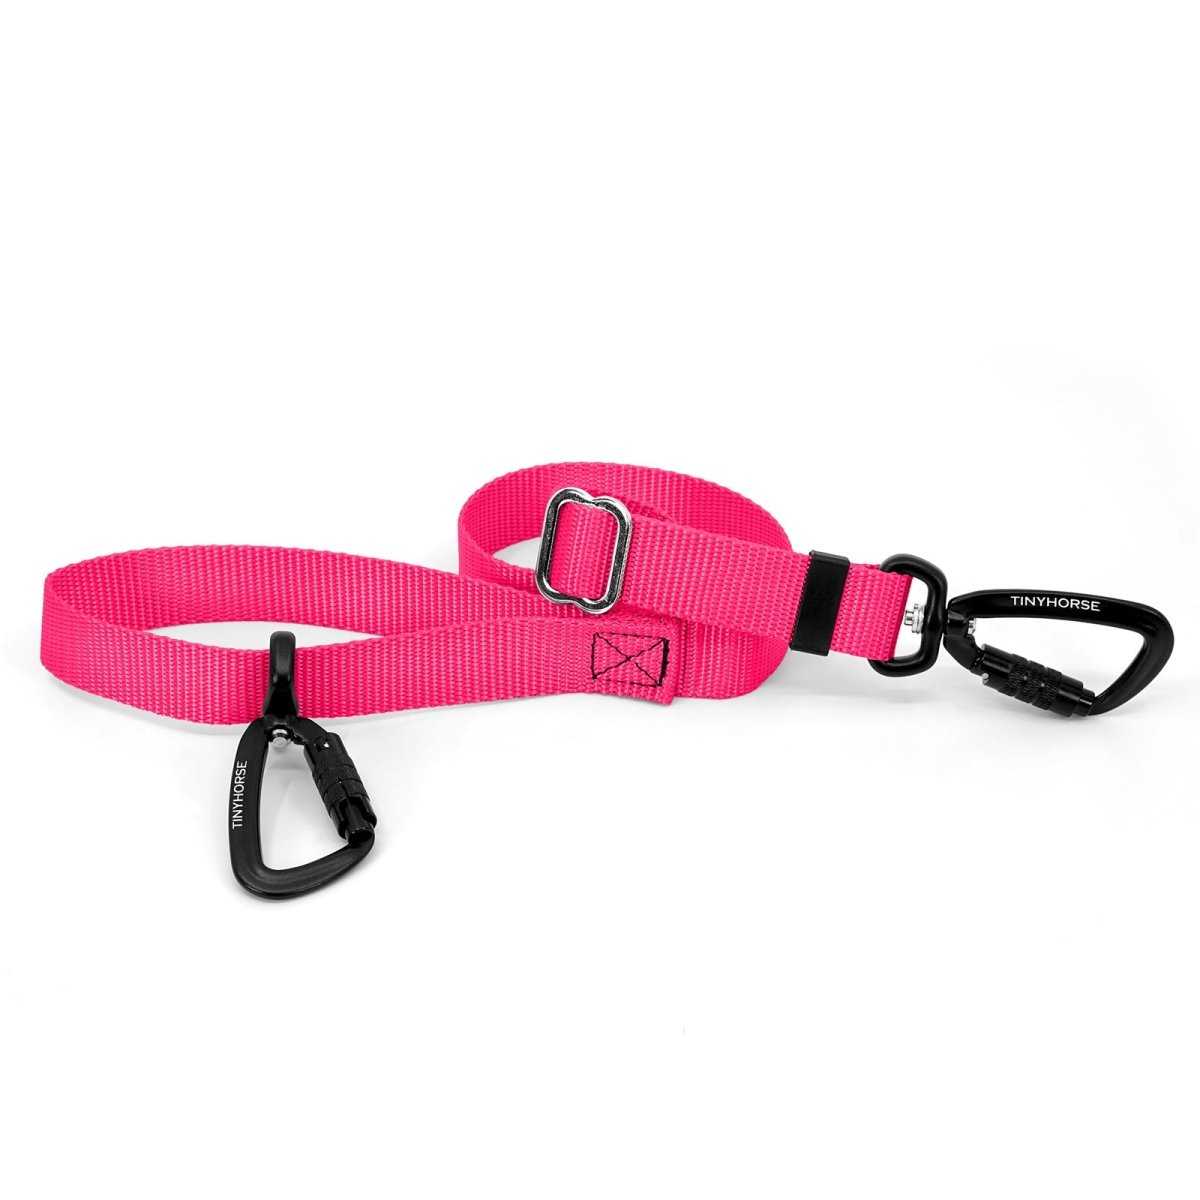 A neon pink-coloured Lead-All Lite with 2 auto-locking carabiners and nylon webbing